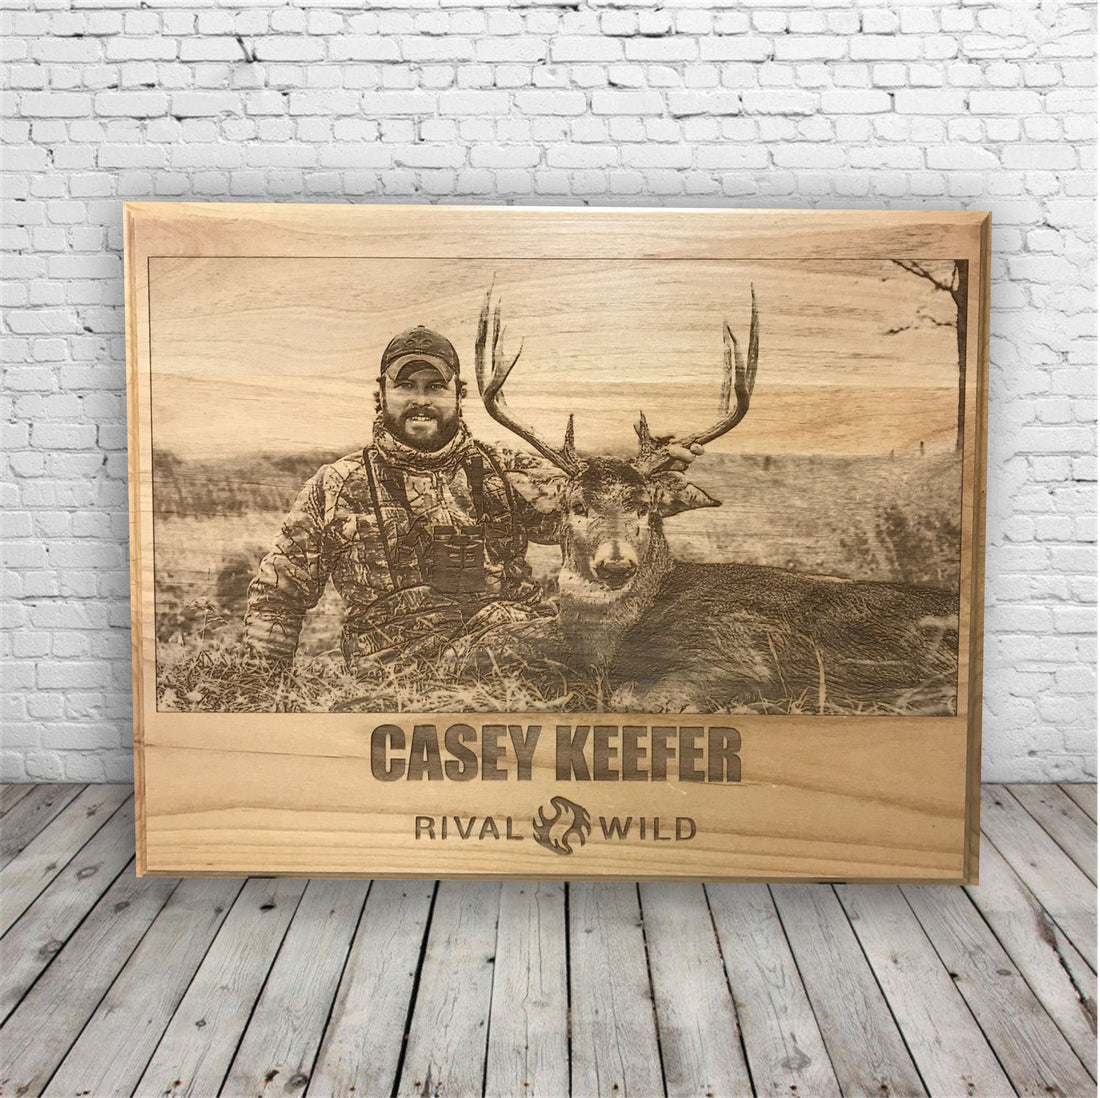 Hunting Photo Engraved on Wood Plaque